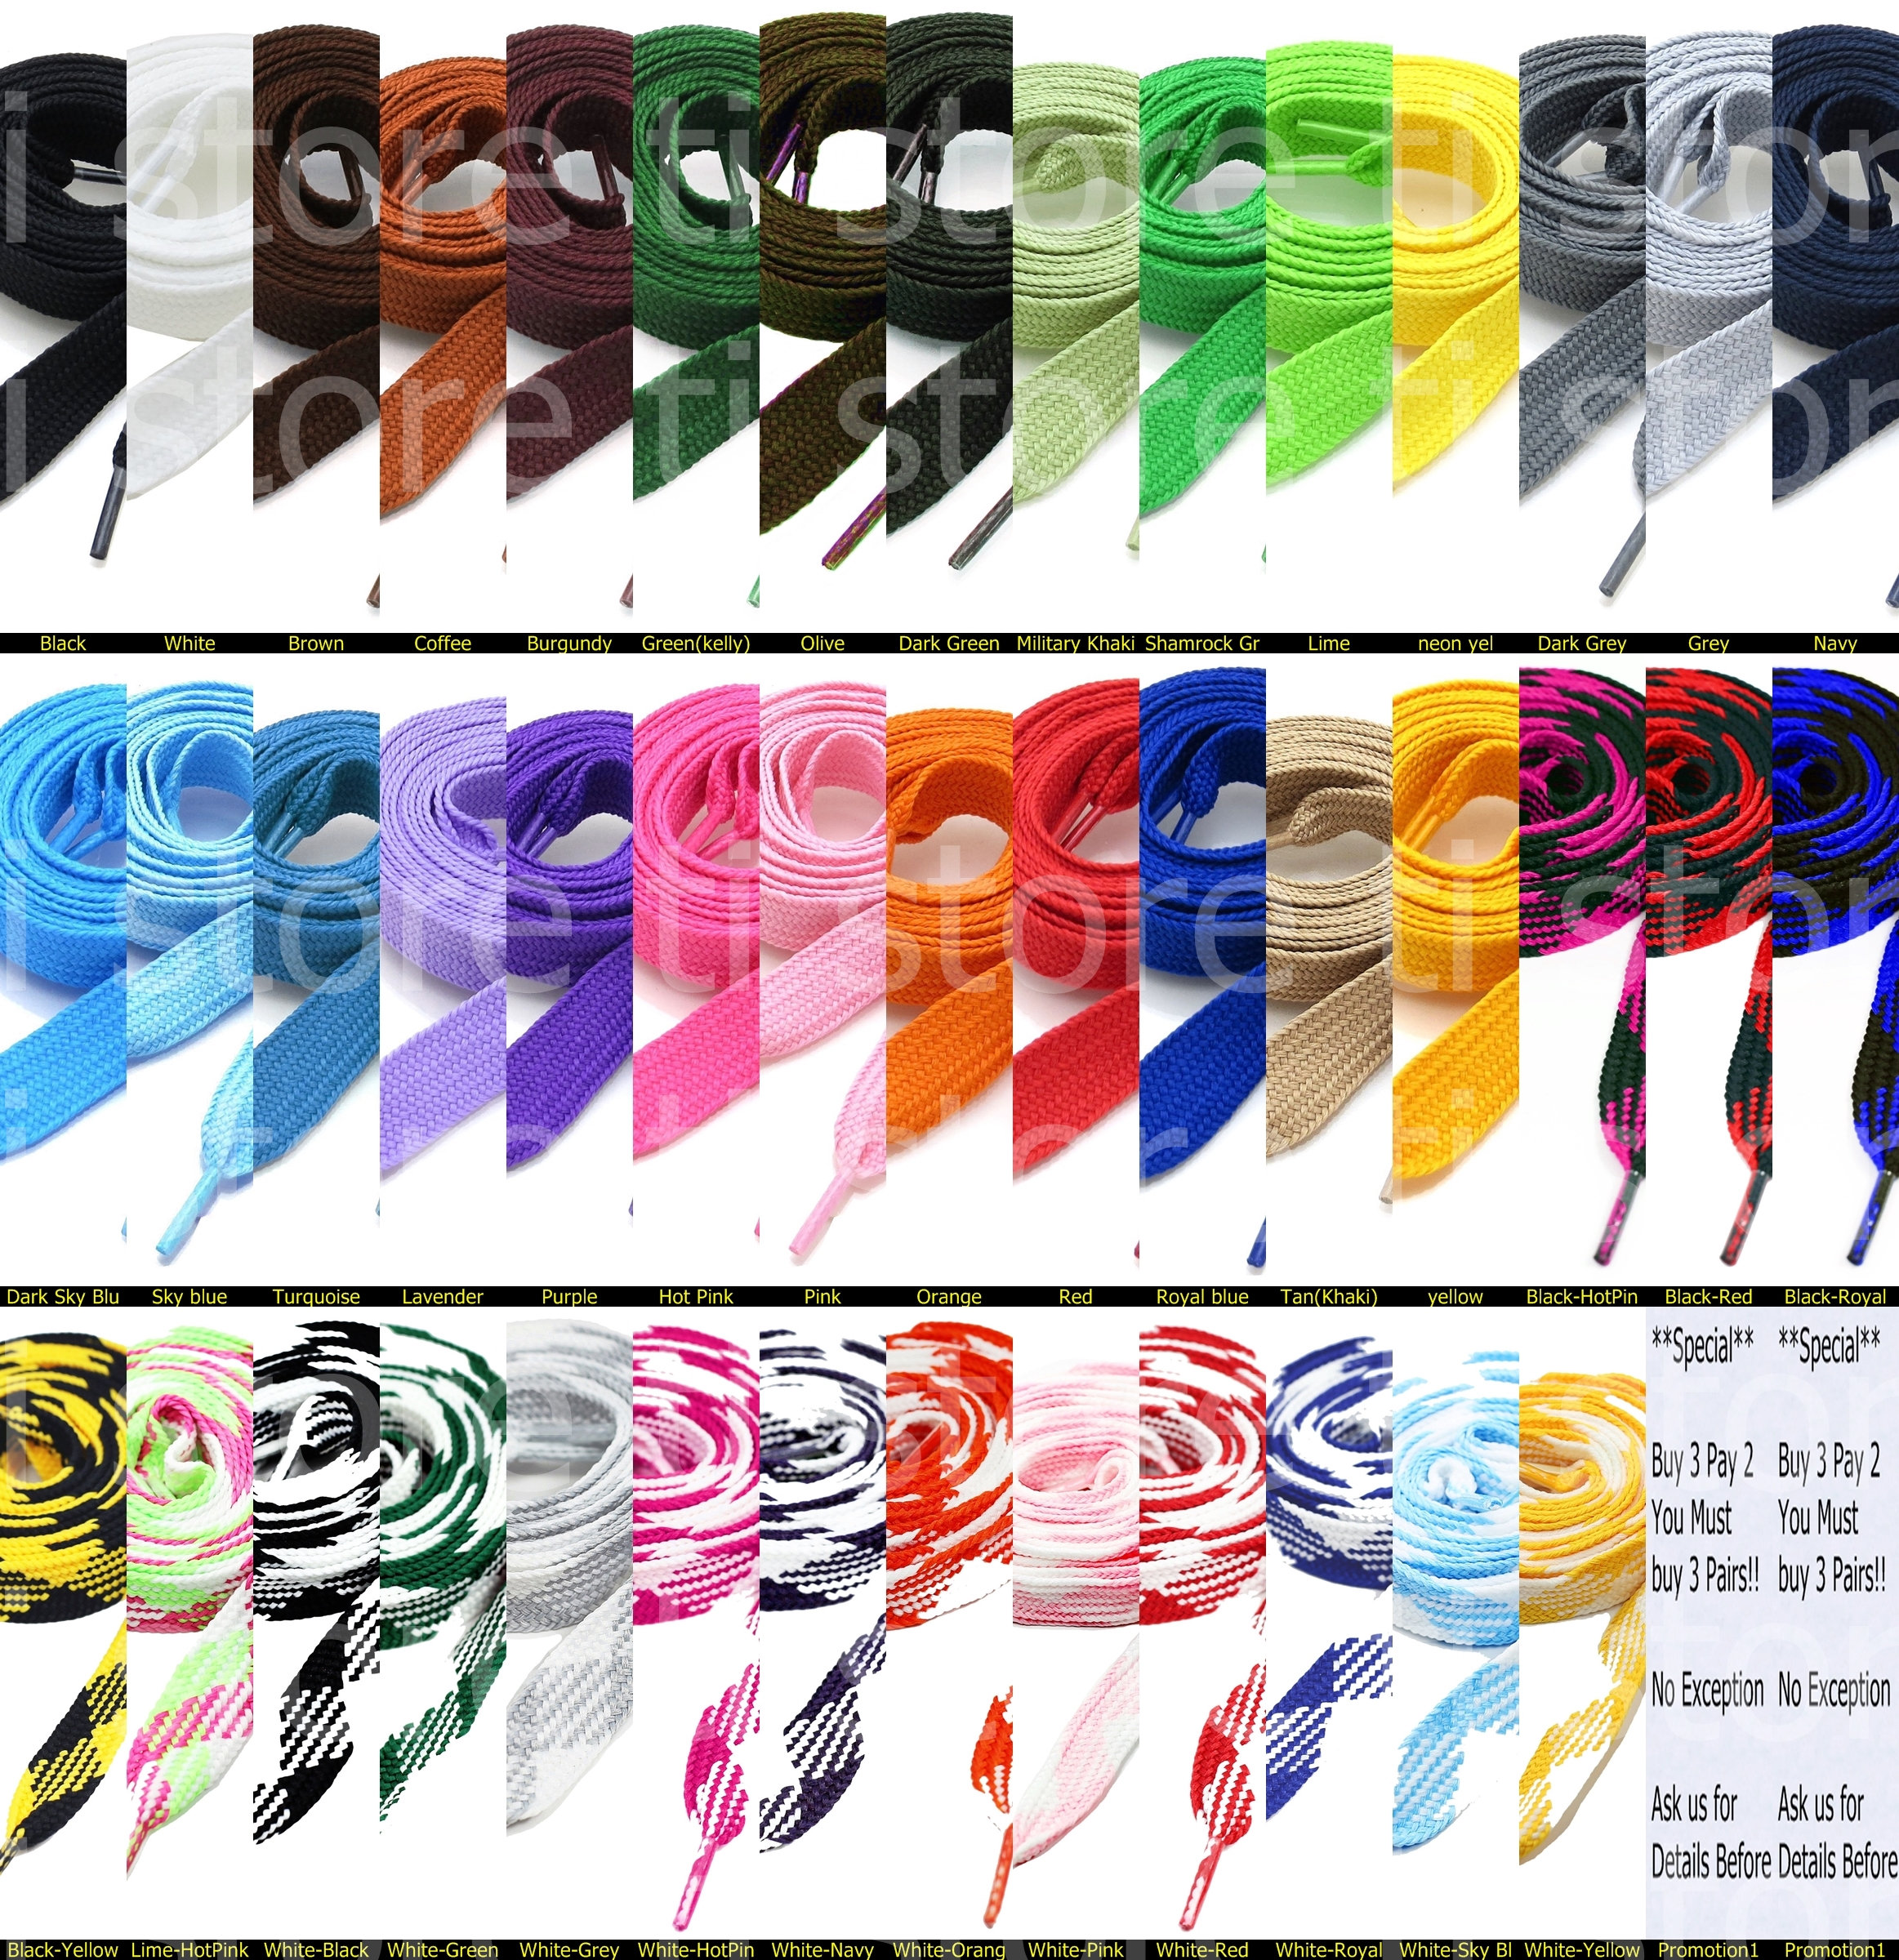 10 Pairs 52" Thick Shoelace Sneakers Athletic Shoelace 23 Color String Shoelaces 